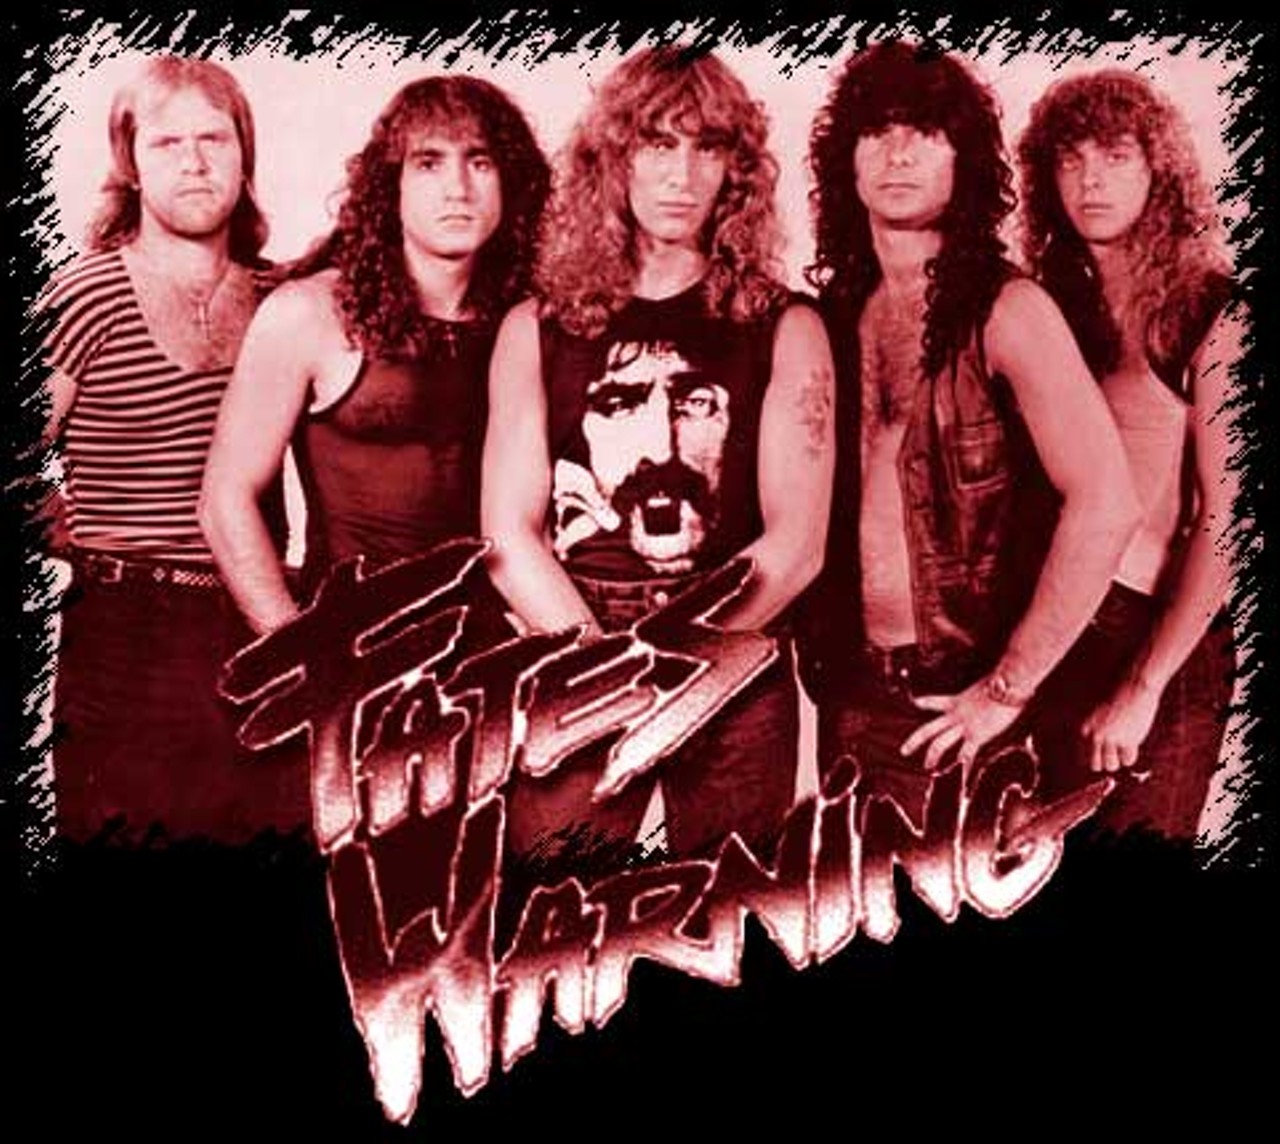 Fates Warning
11/16 at Harpo’s, Detroit
To be fair, Fates Warning are more a proggy metal band that a hair troupe, but we’re including them anyway because it just feels right. Formed in Hartford, Connecticut, in ’83 and signed to Metal Blade Records alongside the likes of Anthrax, Fates Warning inspired bands like Dream Theatre and Queensryche to grow their hair long, write a catchy hook and learn how to play really, really widdly guitar. God love them.